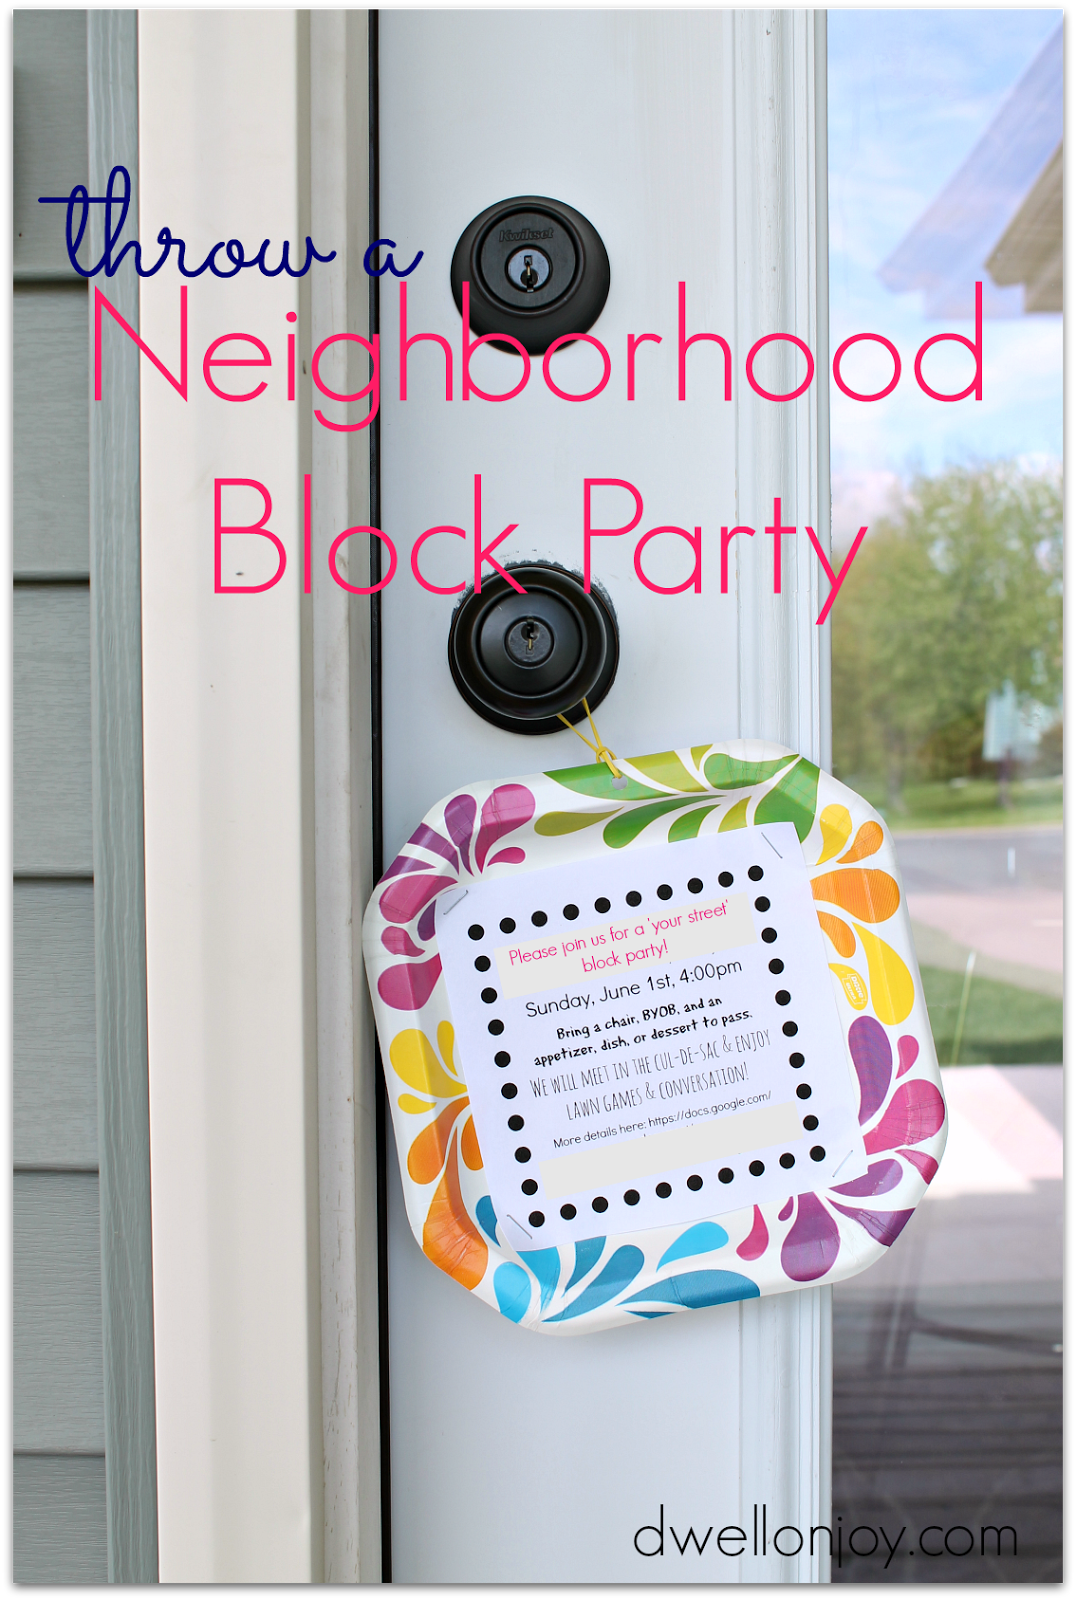 neighborhood block party invitation template free - Clip Art Library Inside Block Party Flyer Template Free